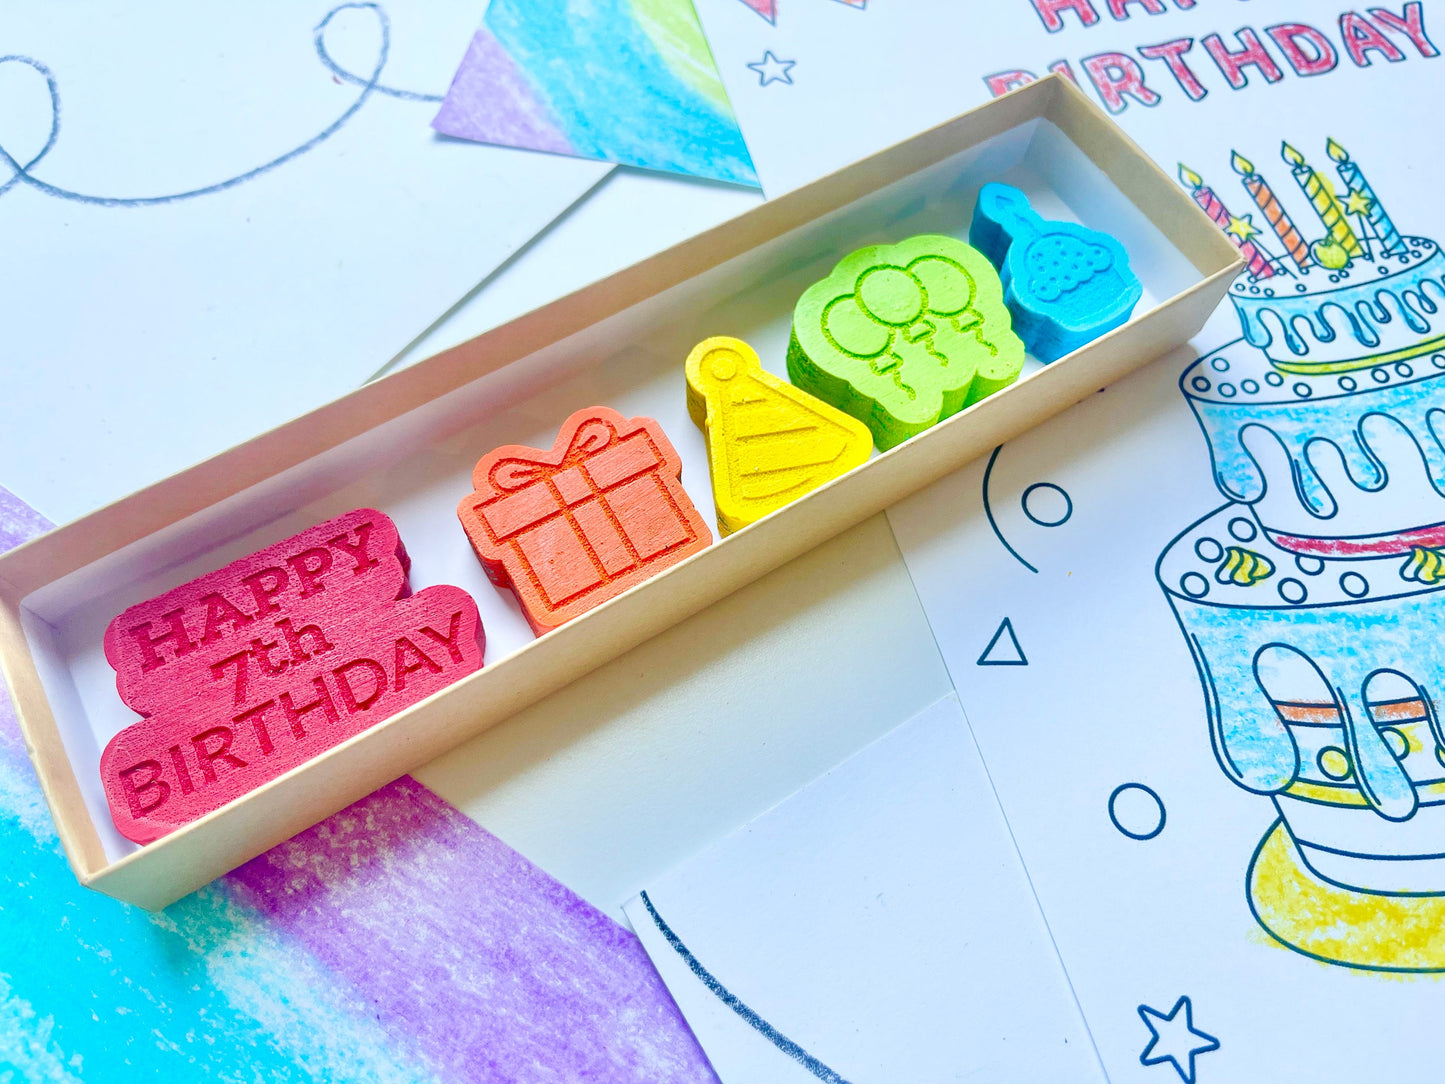 7th Birthday Crayons - 7th Birthday Gifts - Kids Happy Birthday Gifts - Kids Birthday Presents - Gifts For Kids - 7th Birthday Party Favors